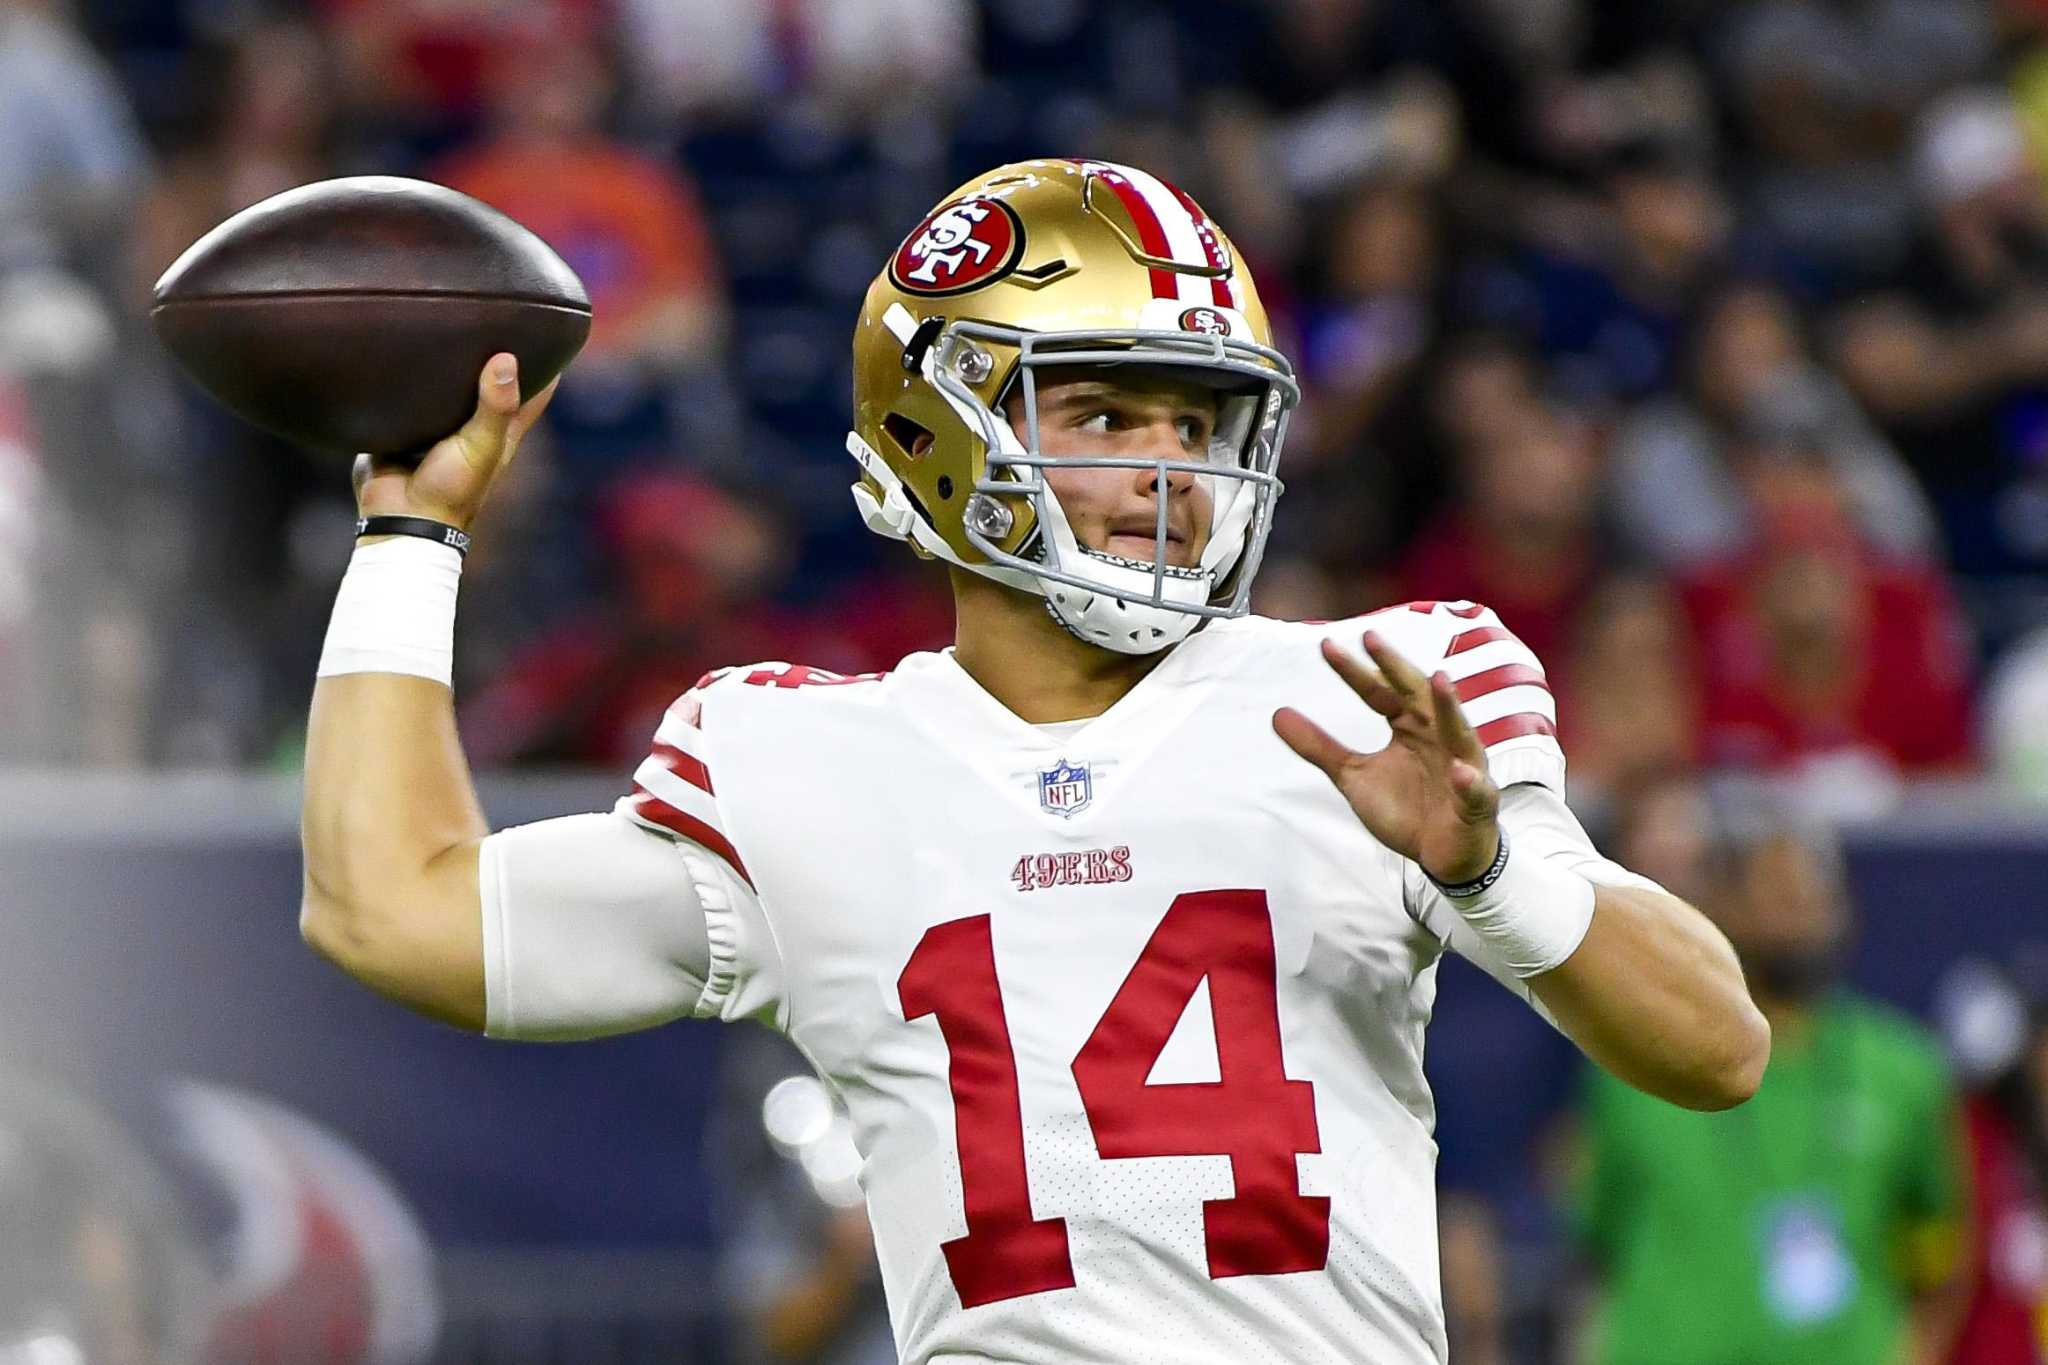 Report: 49ers Expect QB Brock Purdy Back For Start Of Training